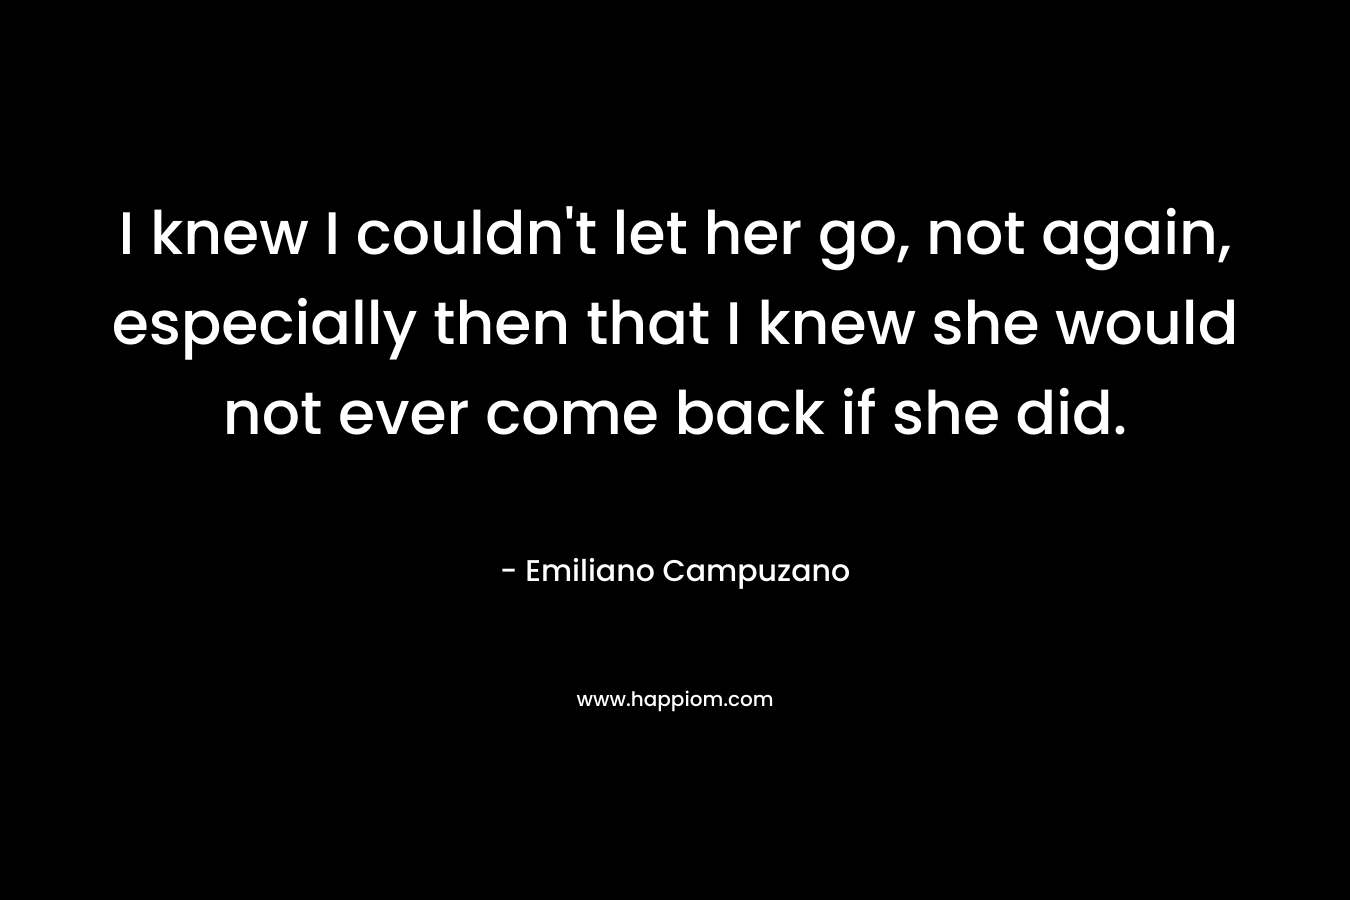 I knew I couldn't let her go, not again, especially then that I knew she would not ever come back if she did.